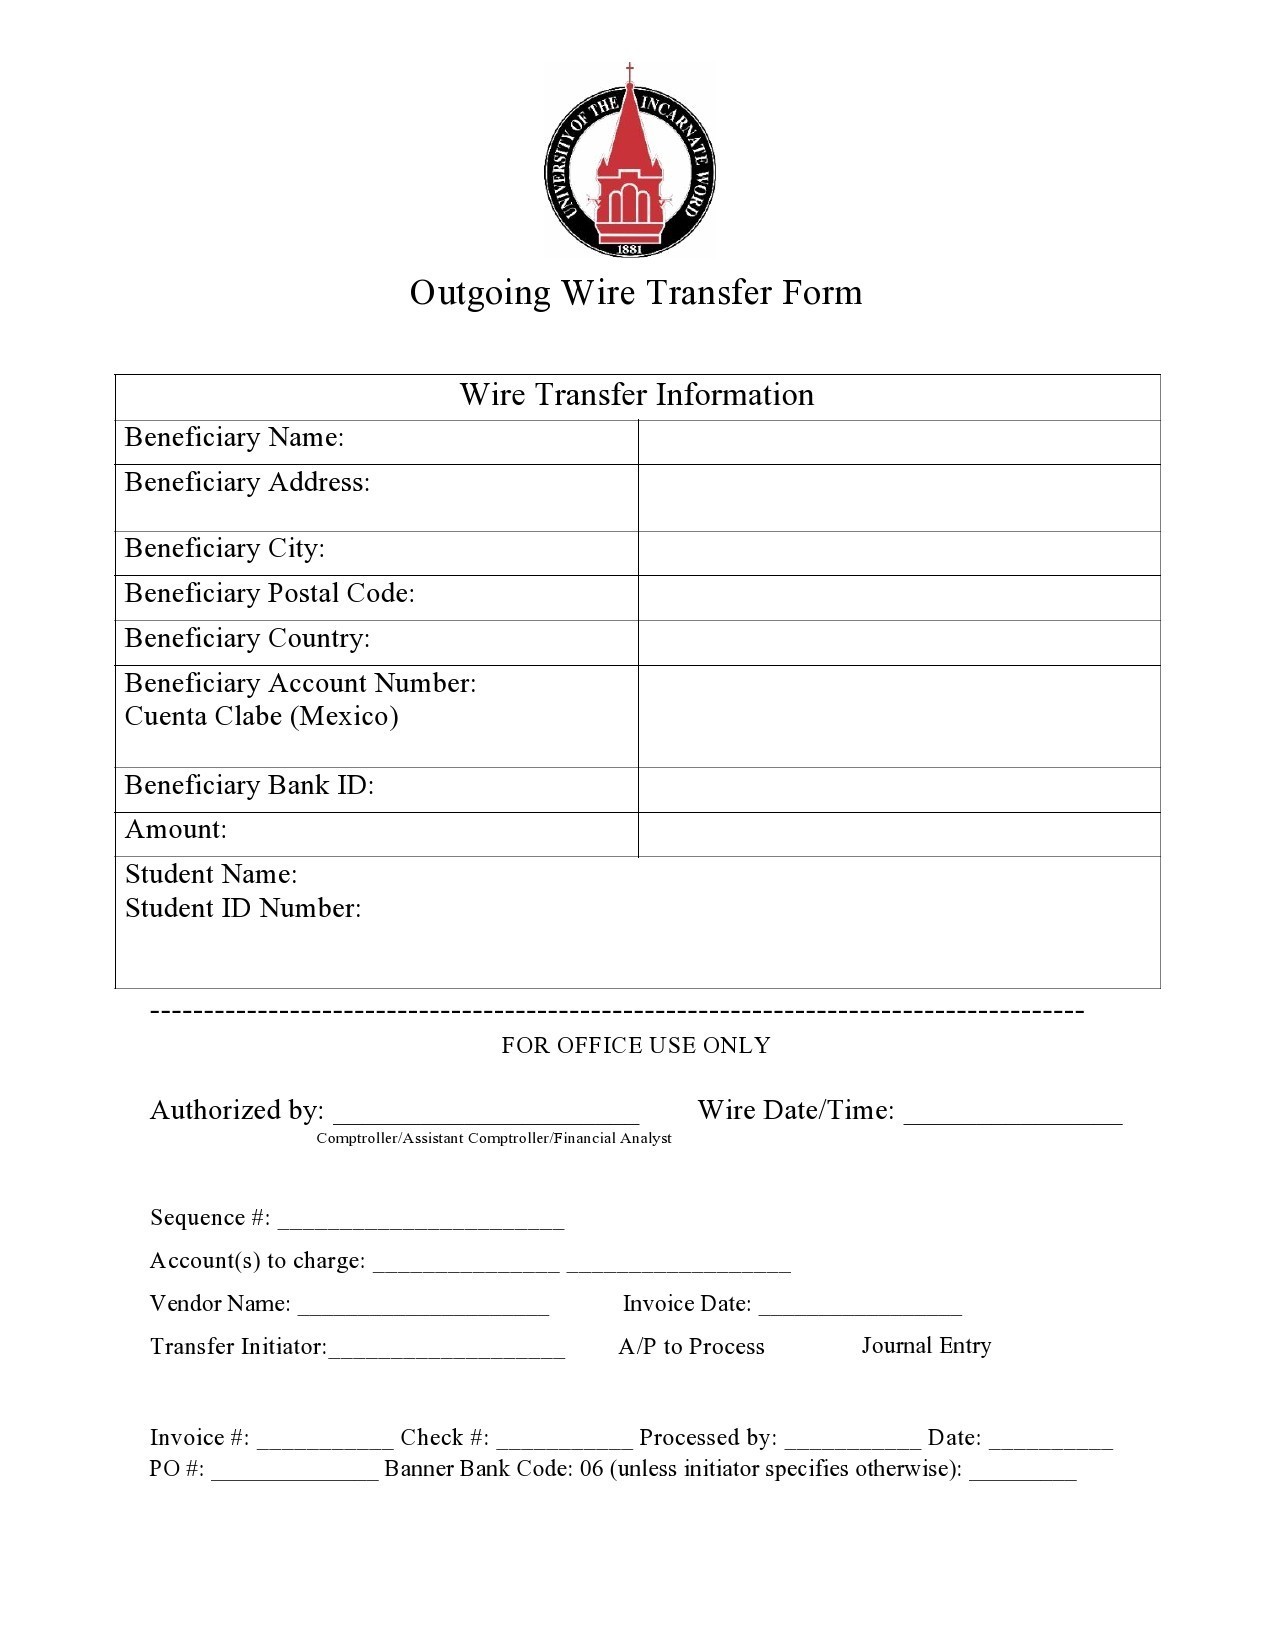 Free wire transfer form 22